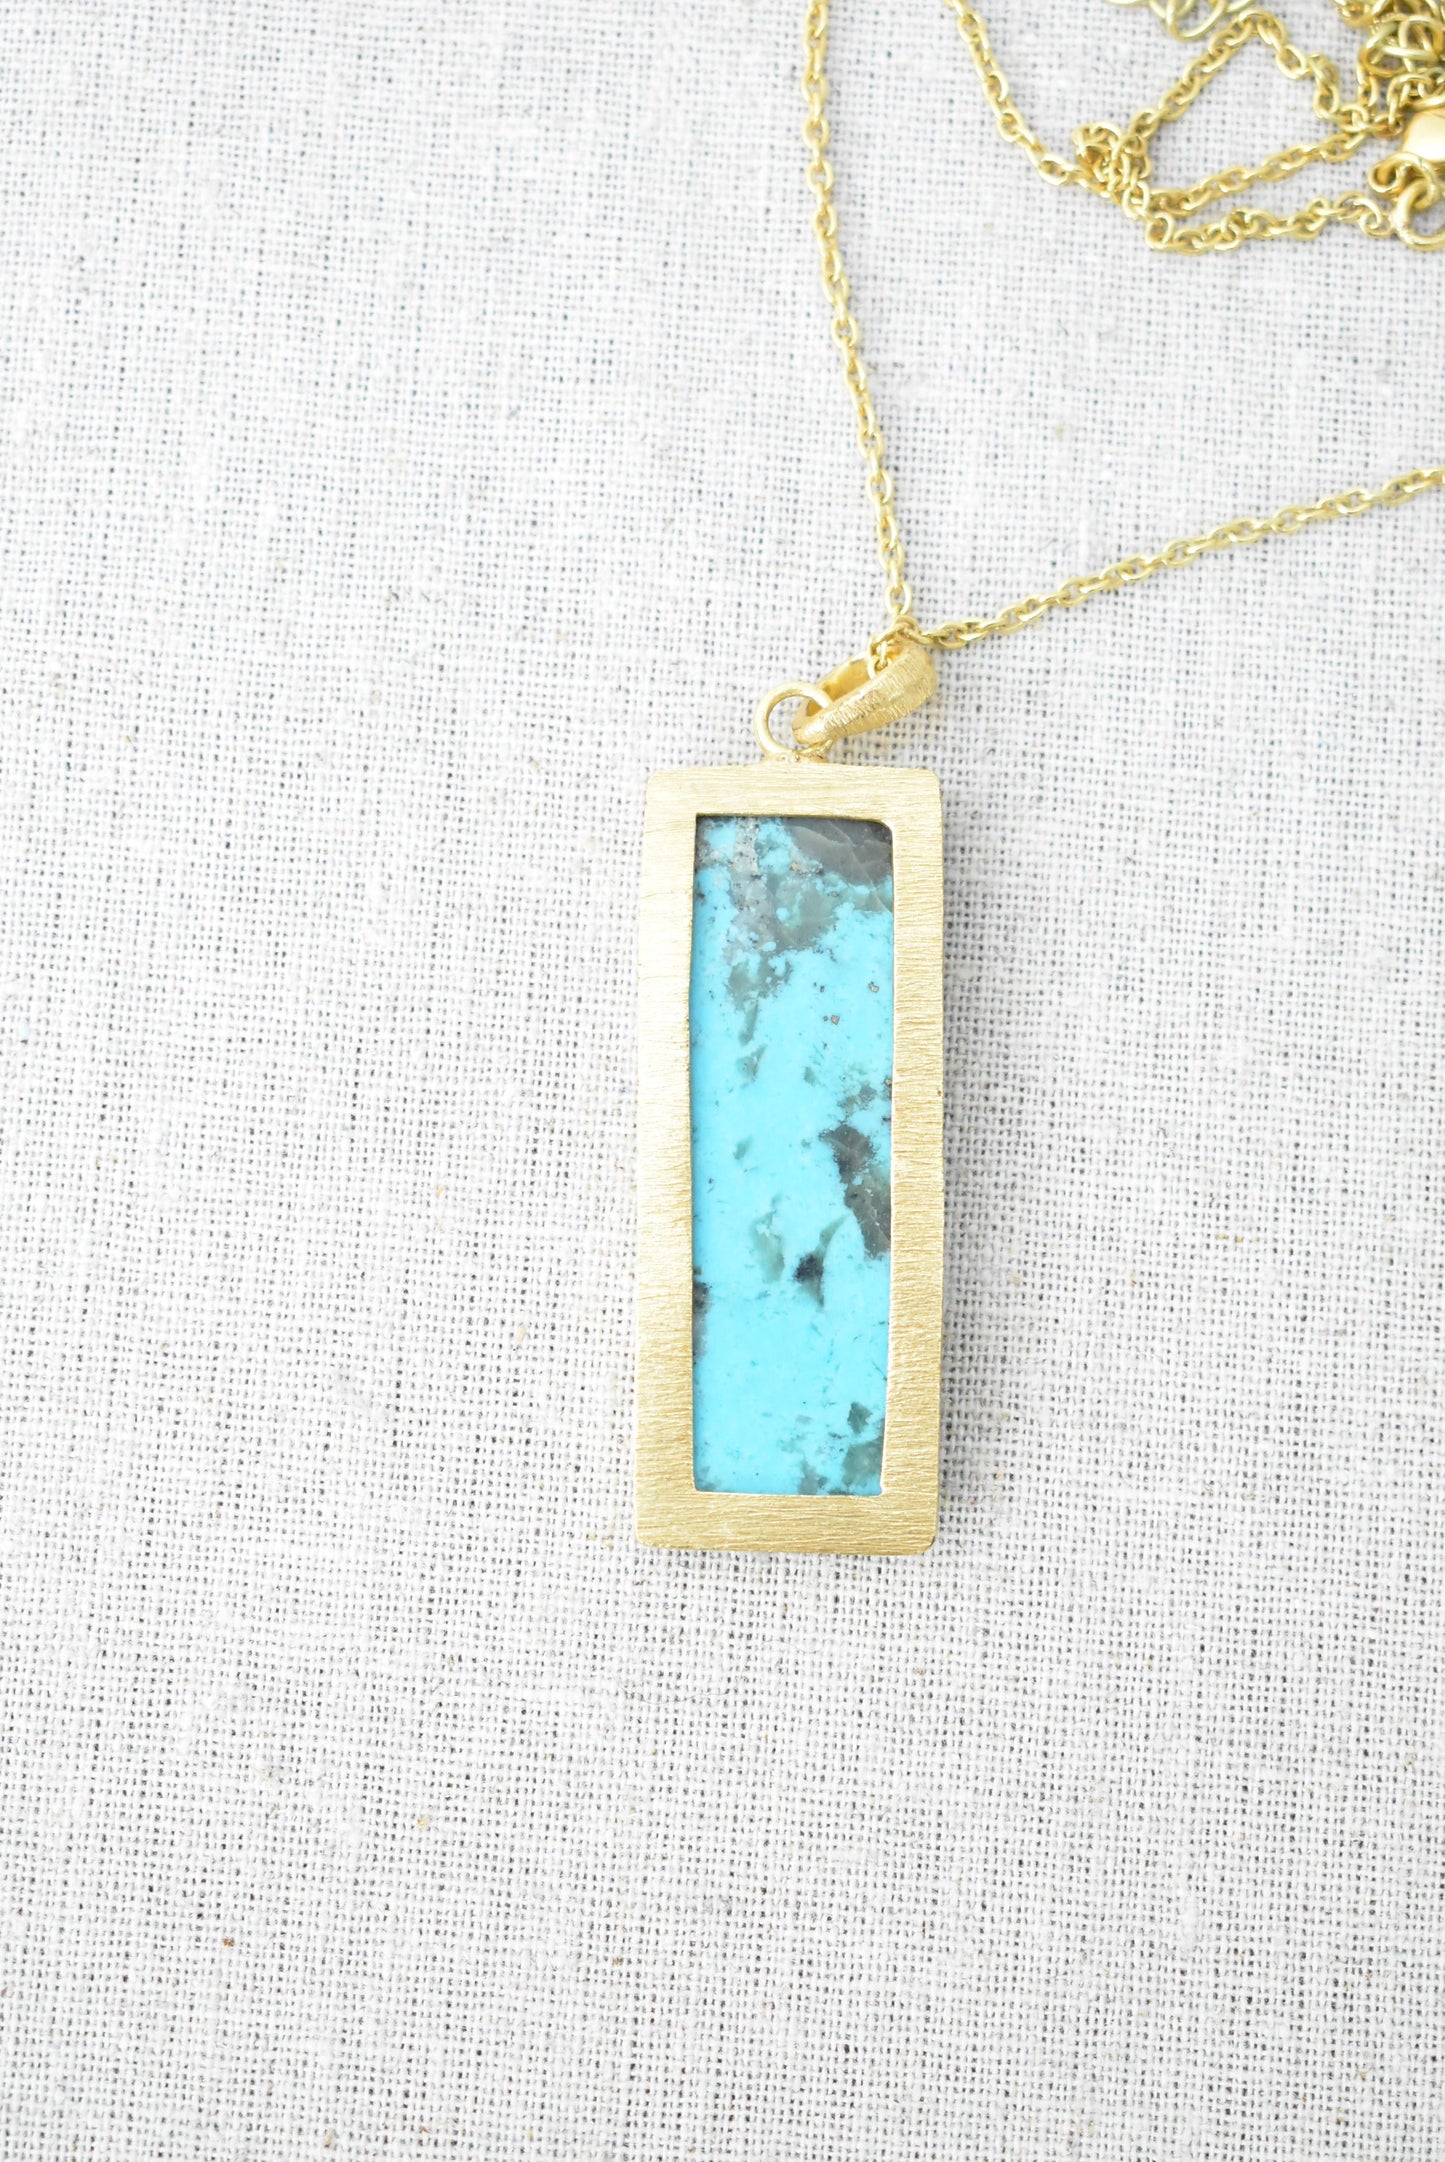 Golden and teal slab pendant (possibly Country Road)